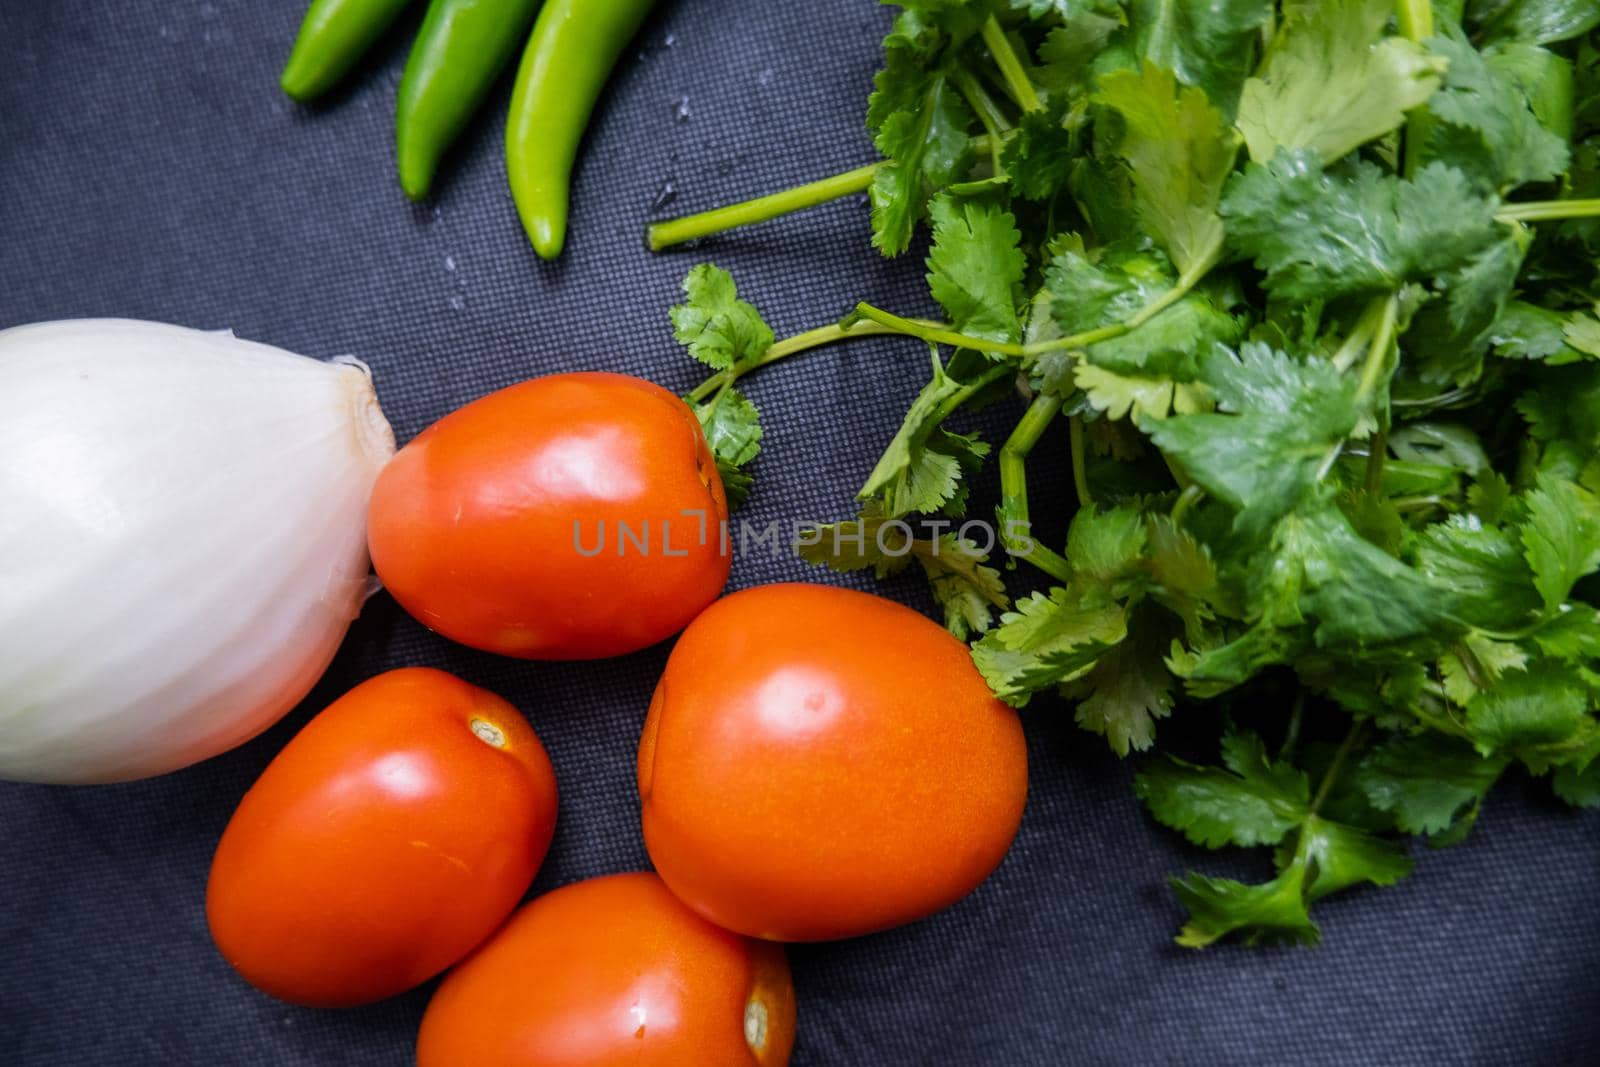 Top view of four tomatoes, green chili peppers, onion, and coriander on table. Fresh and aromatic vegetables and herbs on dark blue surface. Healthy meal preparation